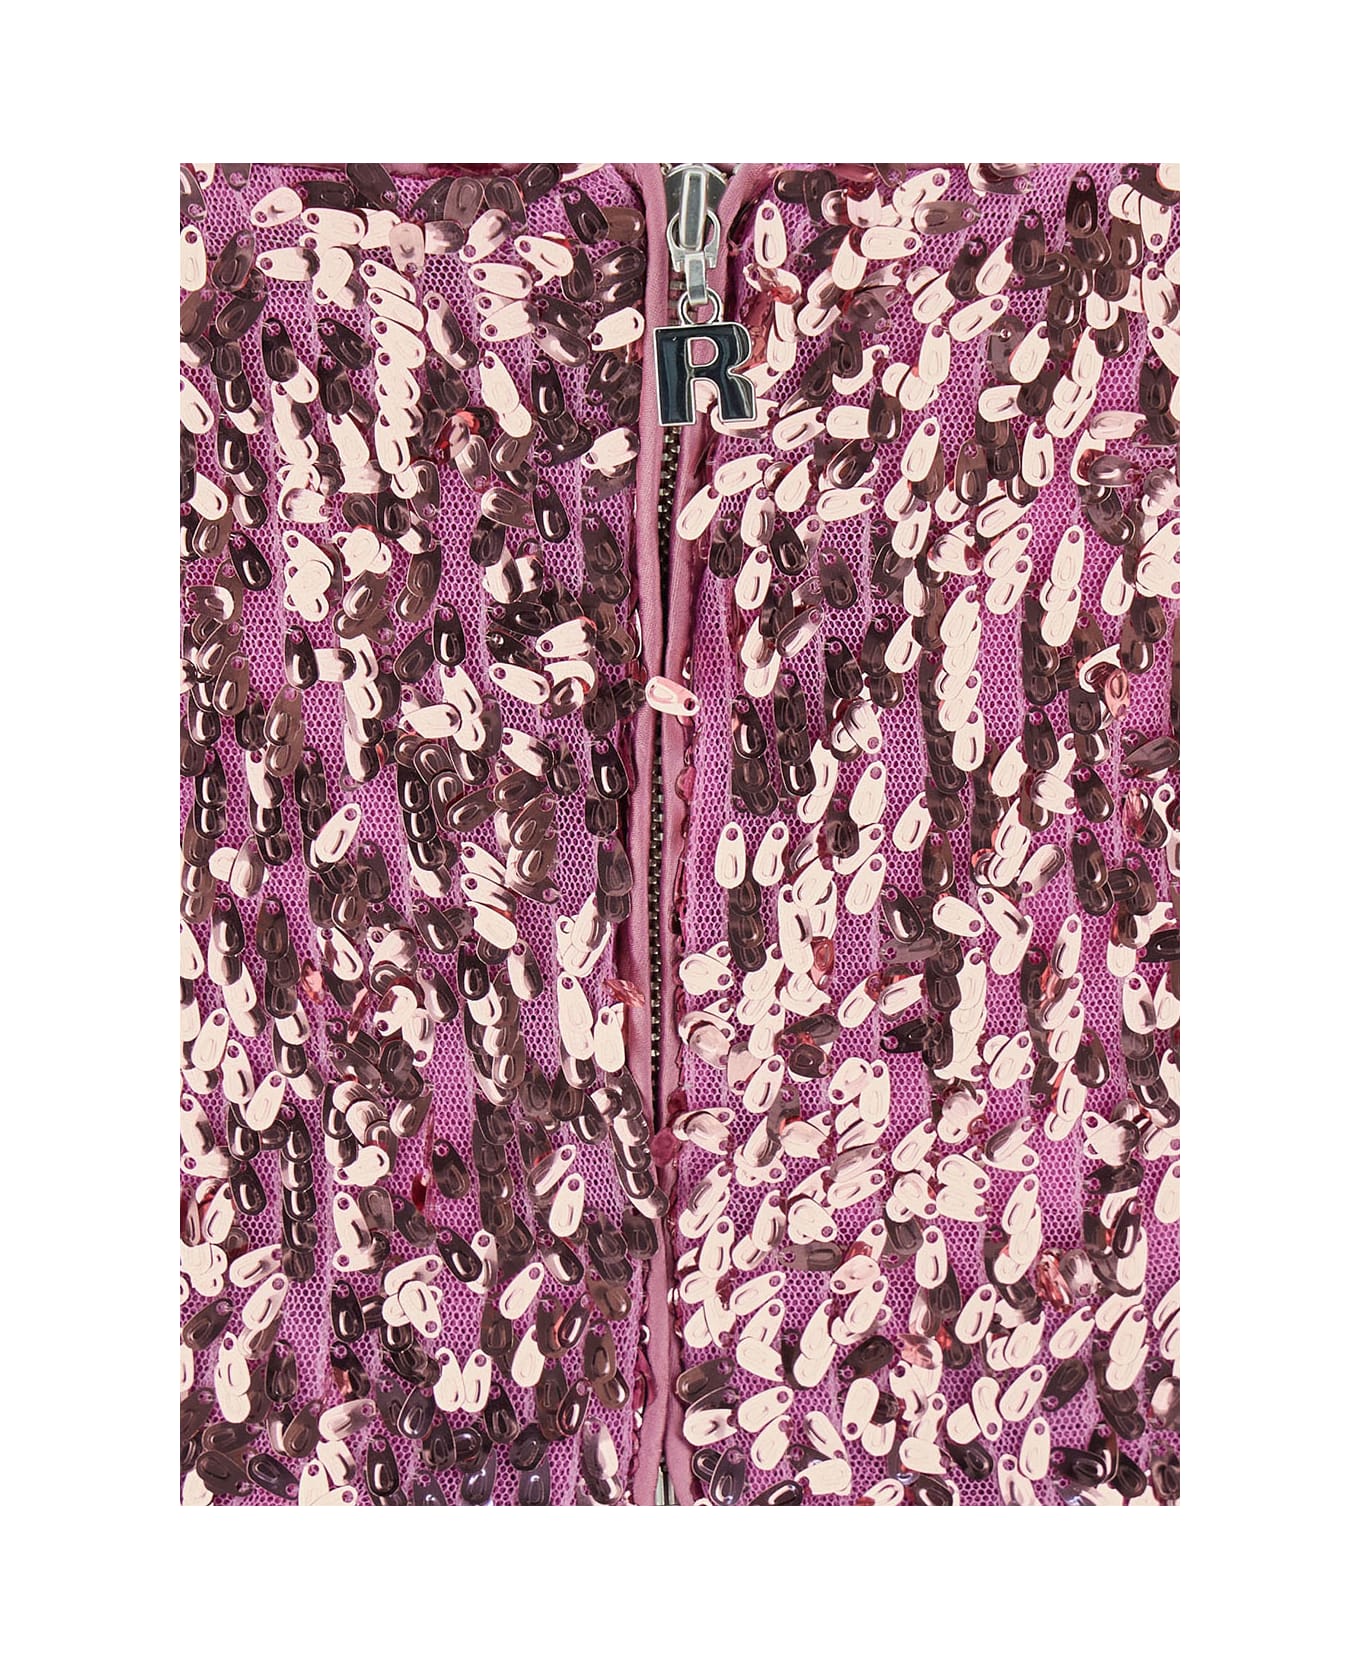 Rotate by Birger Christensen Pink Crop Top With All-over Sequins In Recycled Fabric Woman - Pink トップス